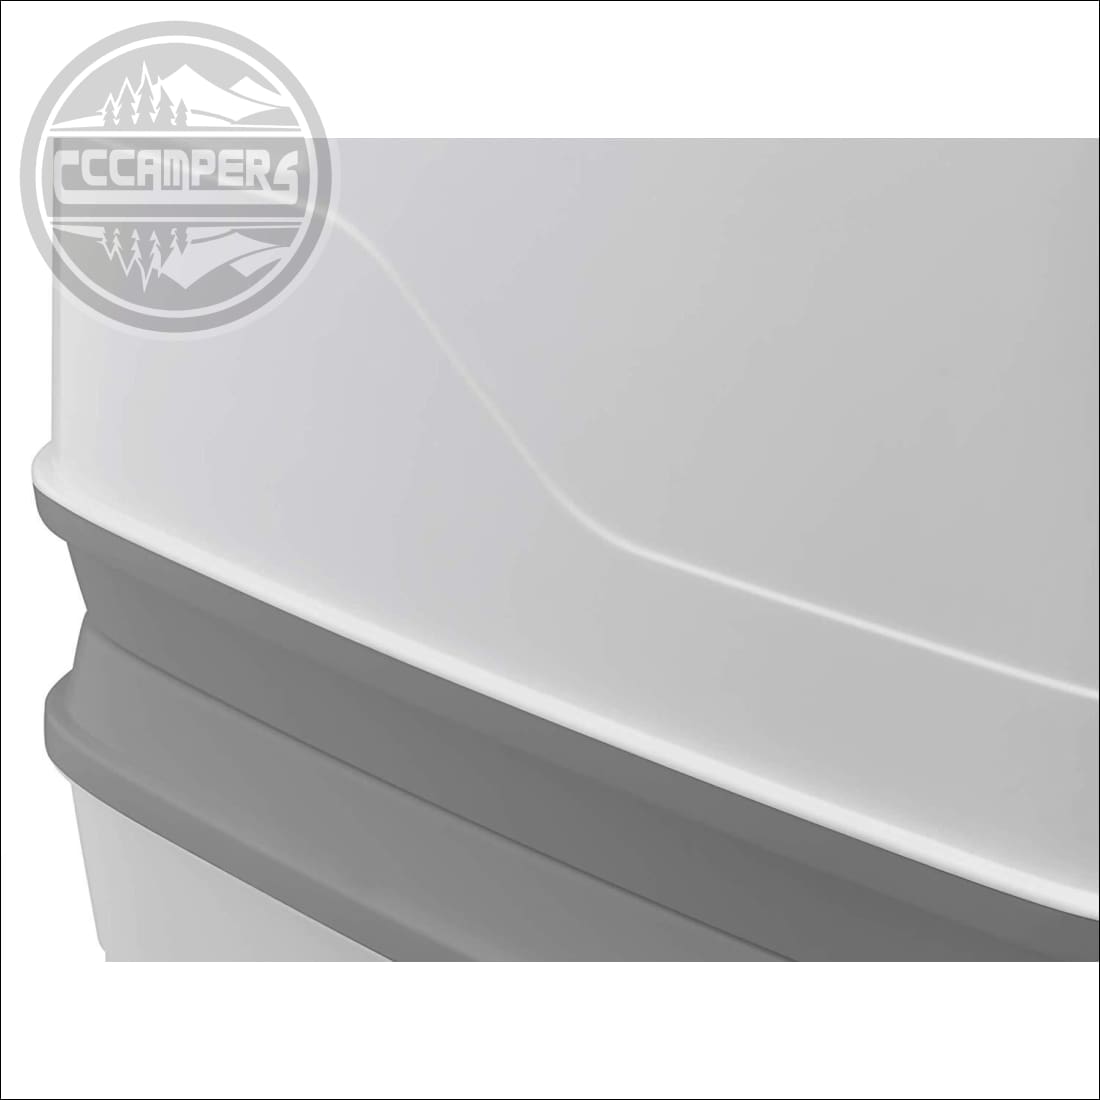 Thetford Porta Potti Qube 335 Portable Toilet * OUT OF STOCK* - CCCAMPERS 